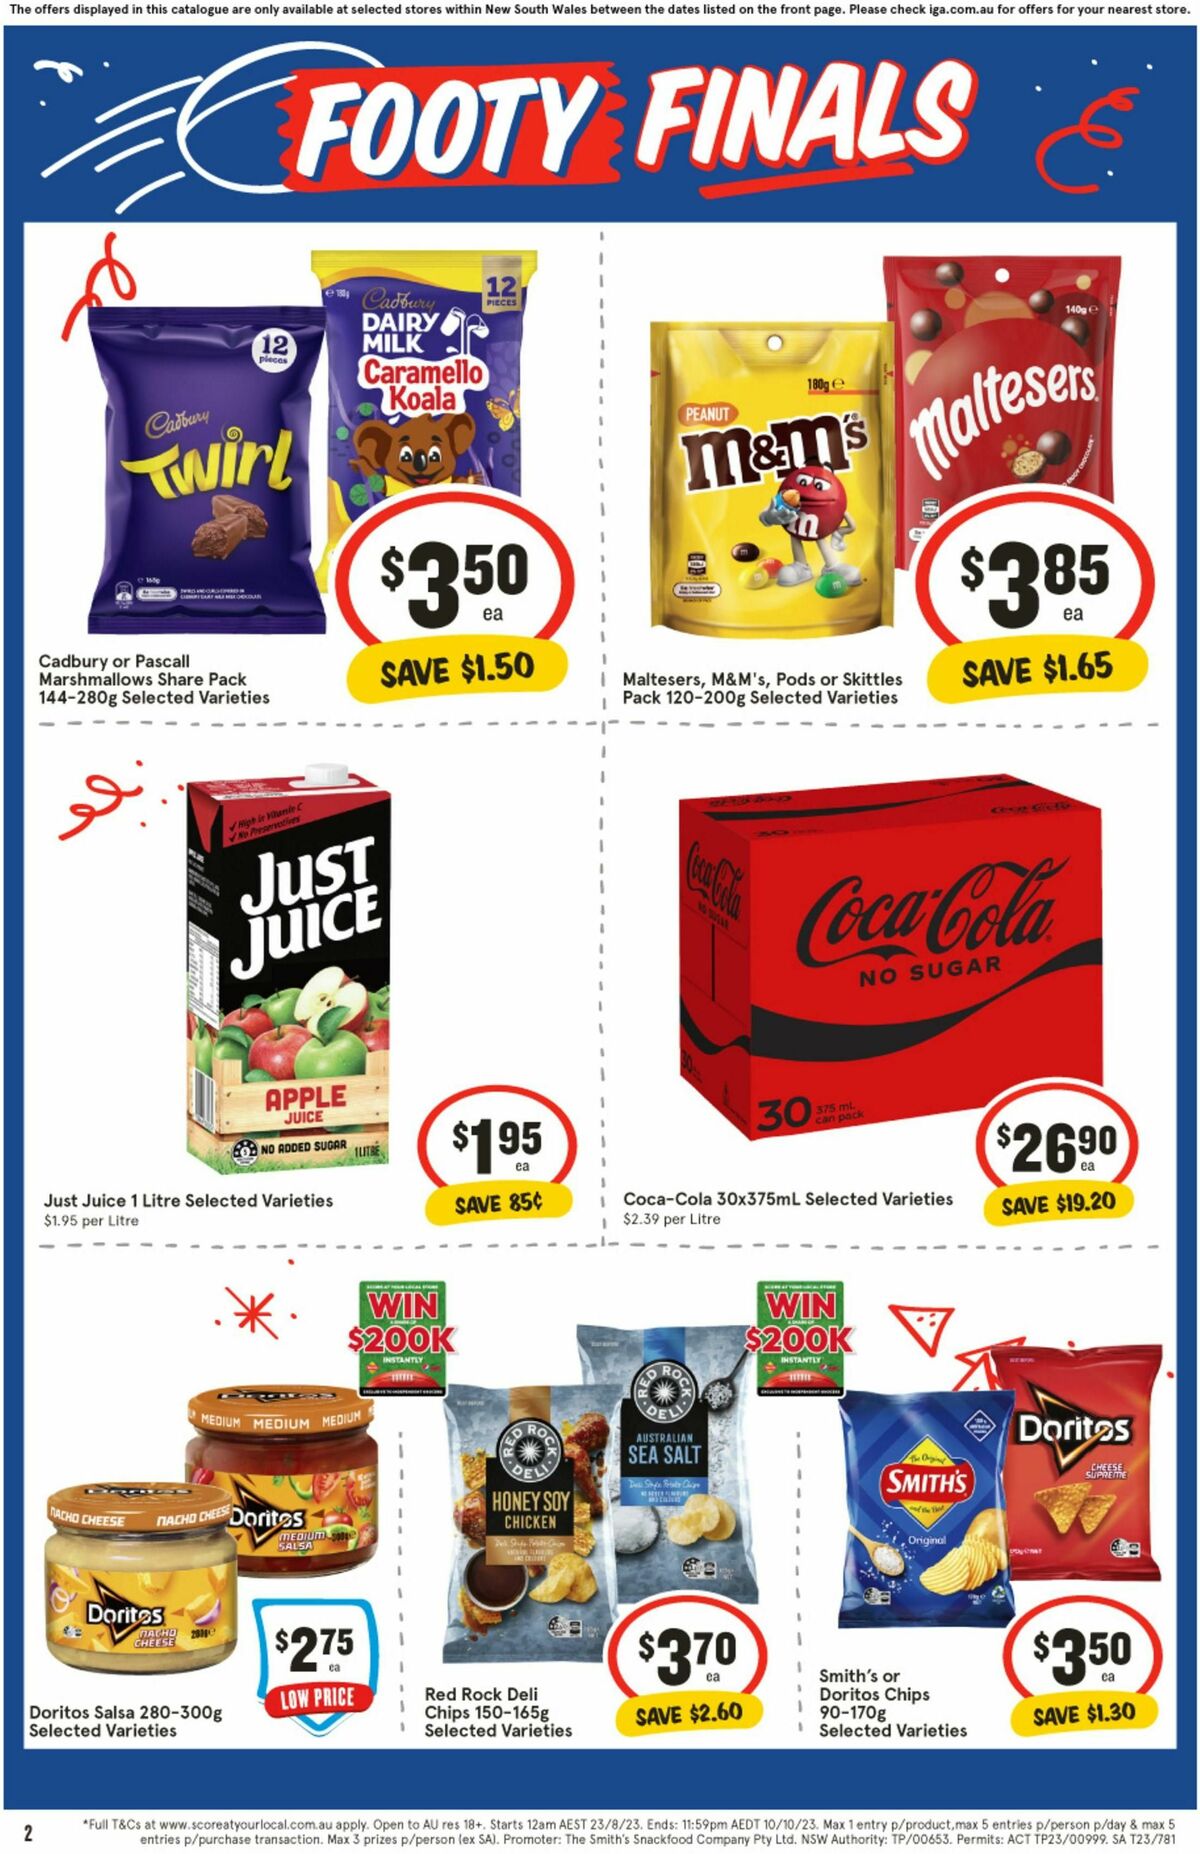 IGA Catalogues from 13 September